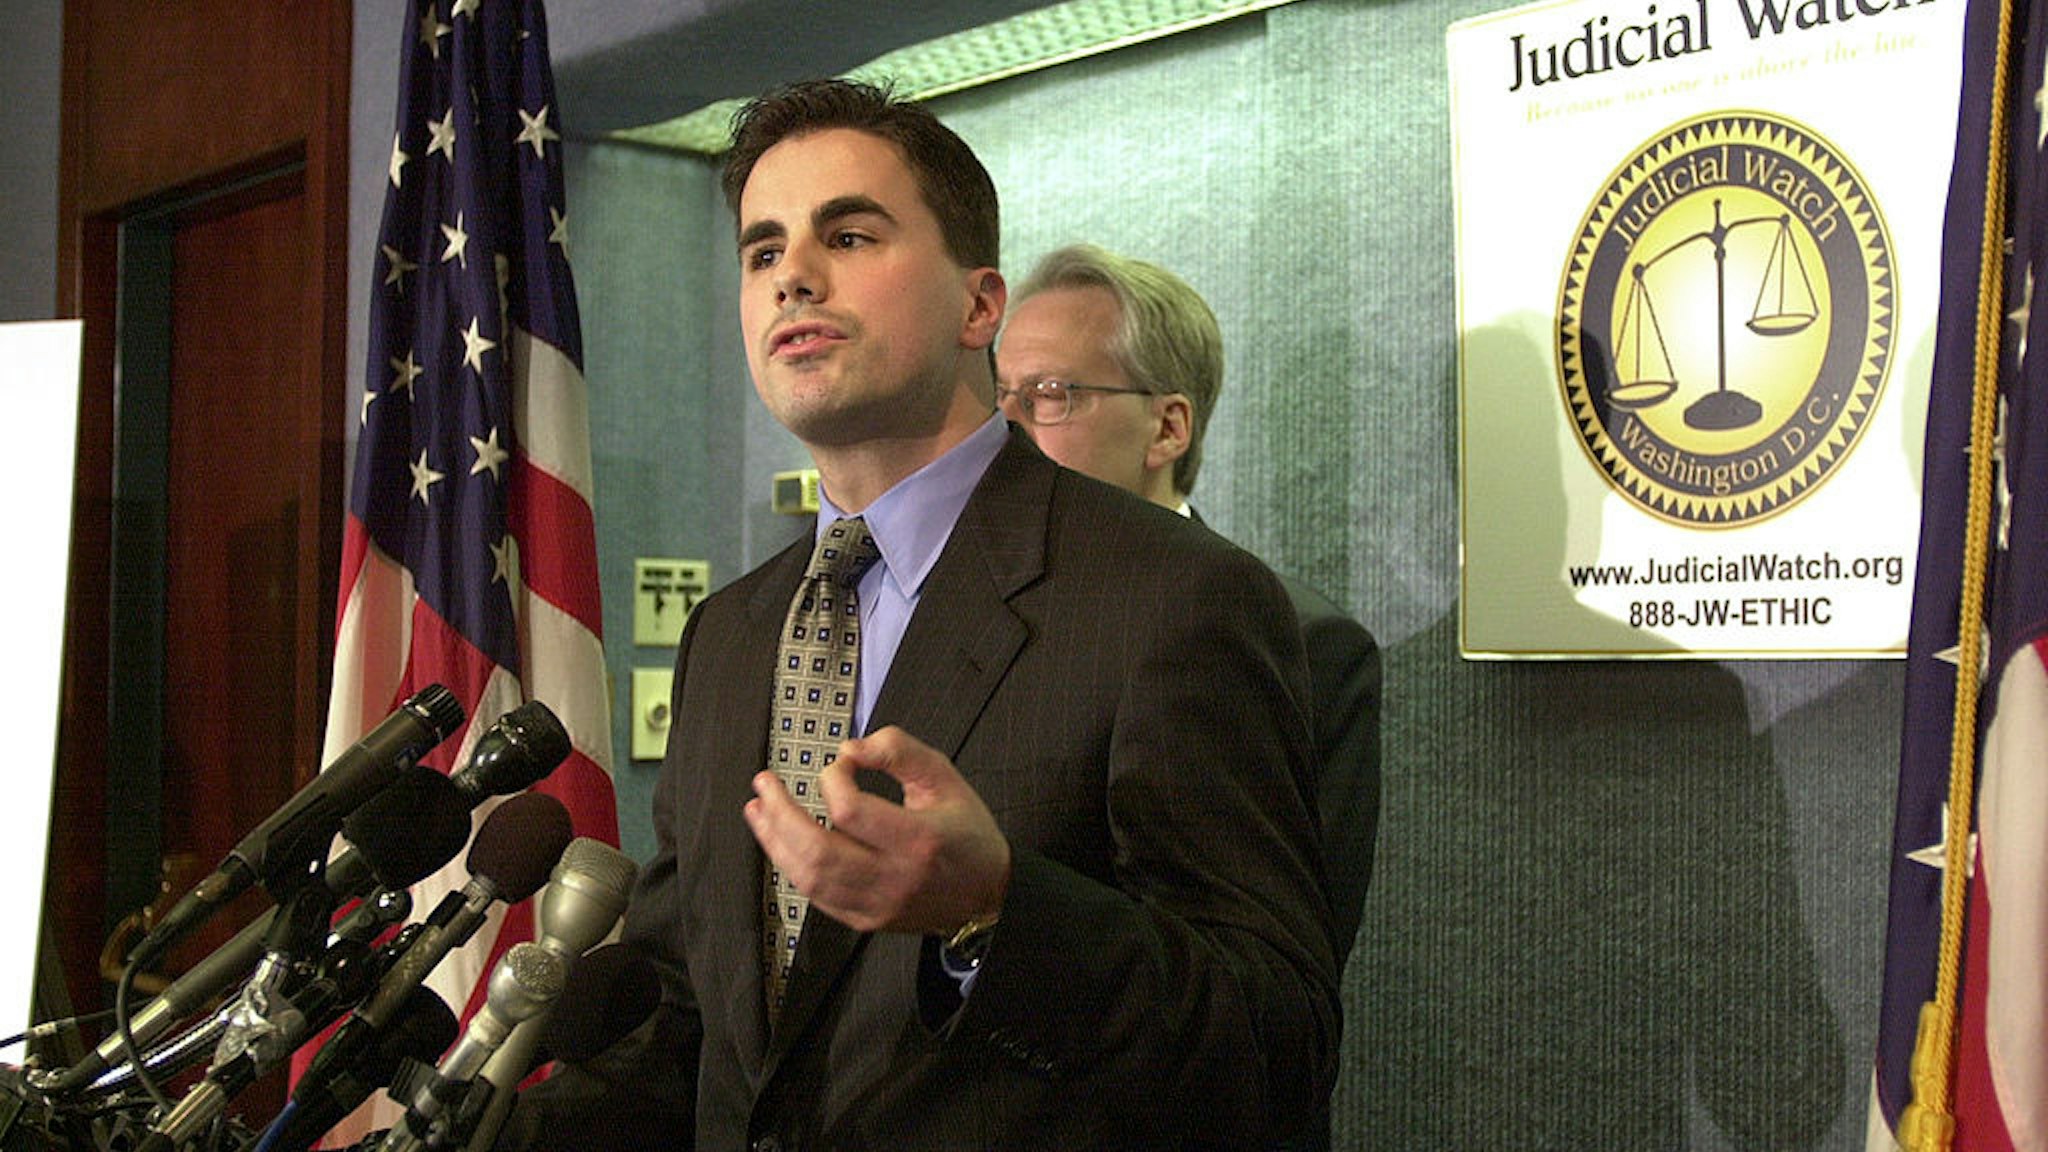 Tom Fitton of Judicial Watch during a press conference to announce a lawsuit against Tom Delay, R-Texas, for alleged fund rasing improprieties.